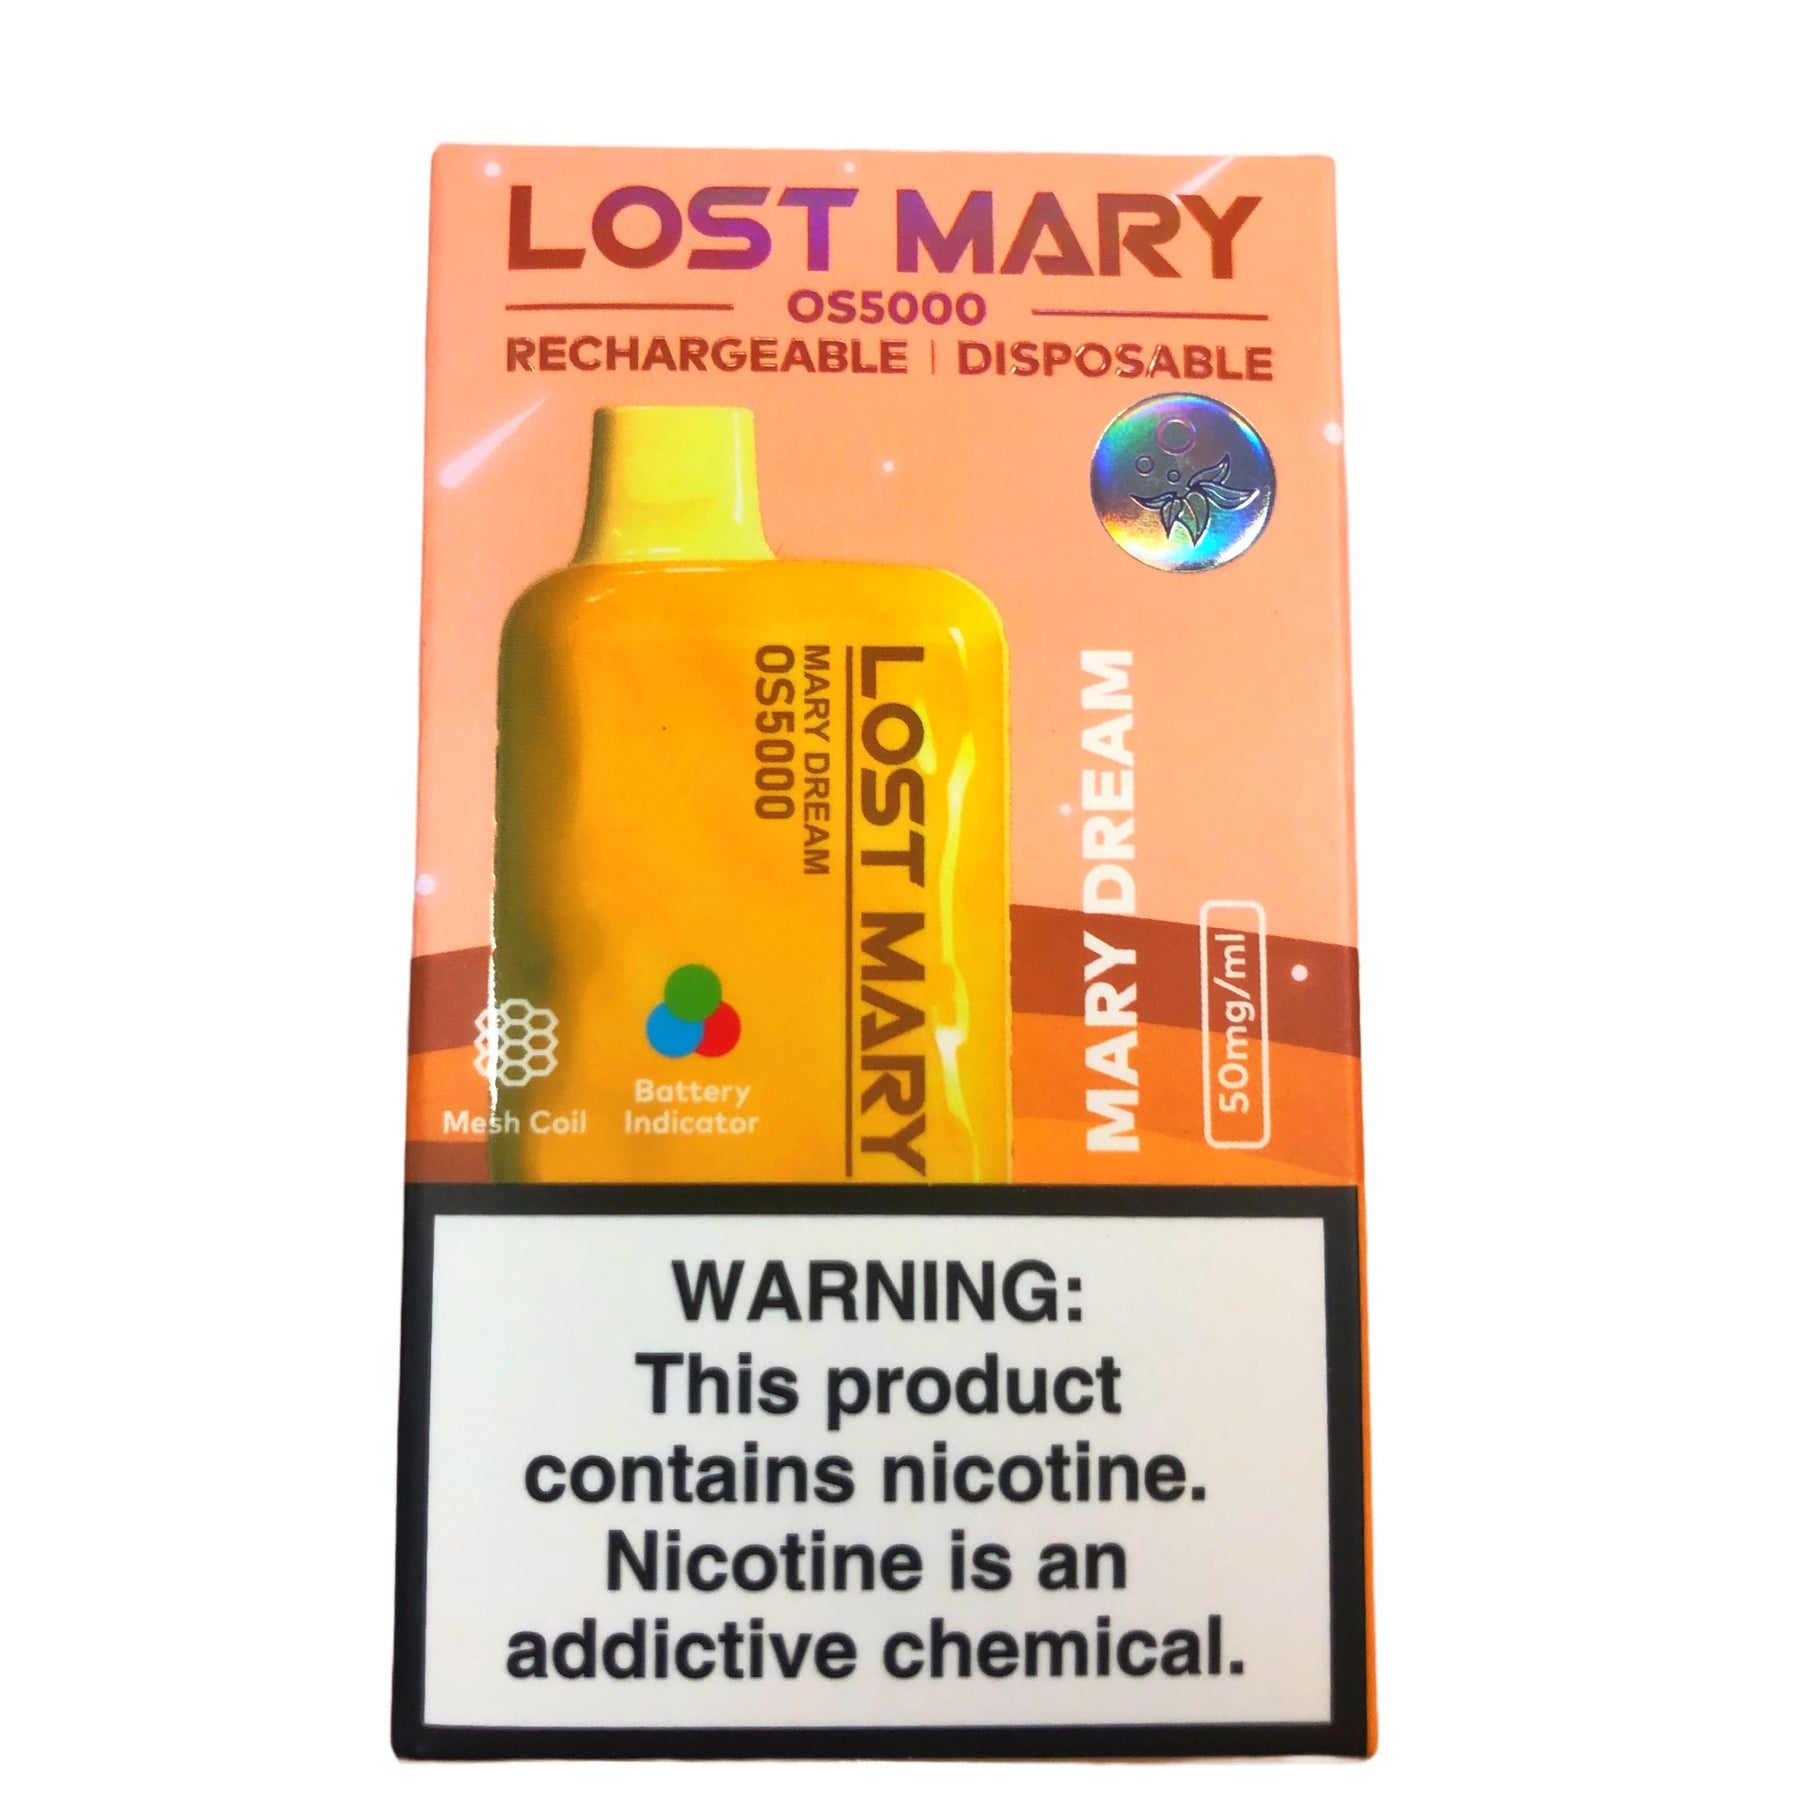 Lost Mary Mary Dream Flavor